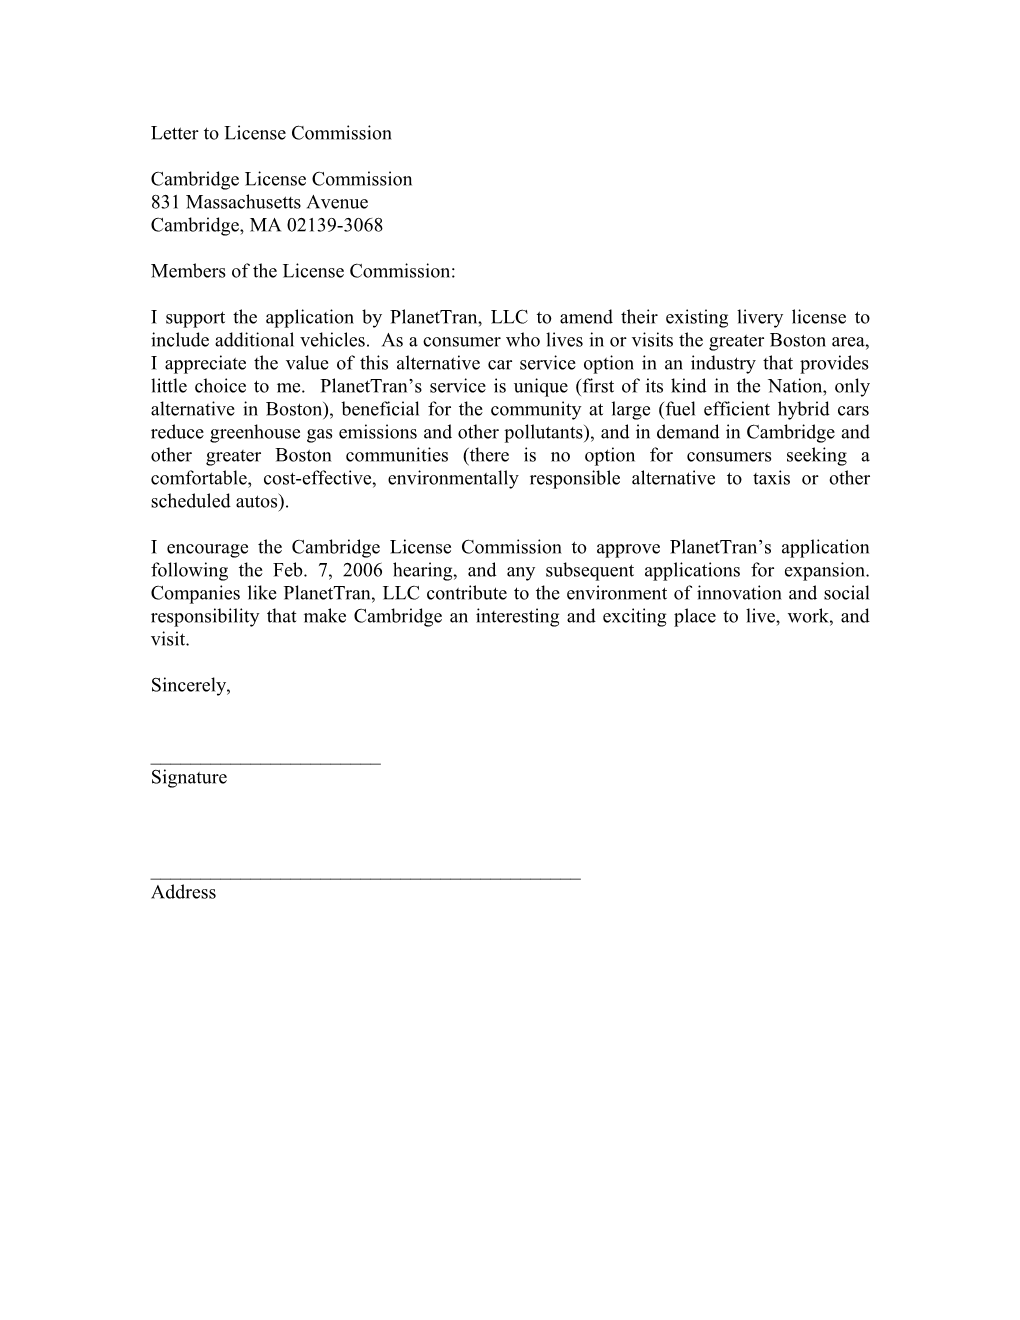 Letter to License Commission